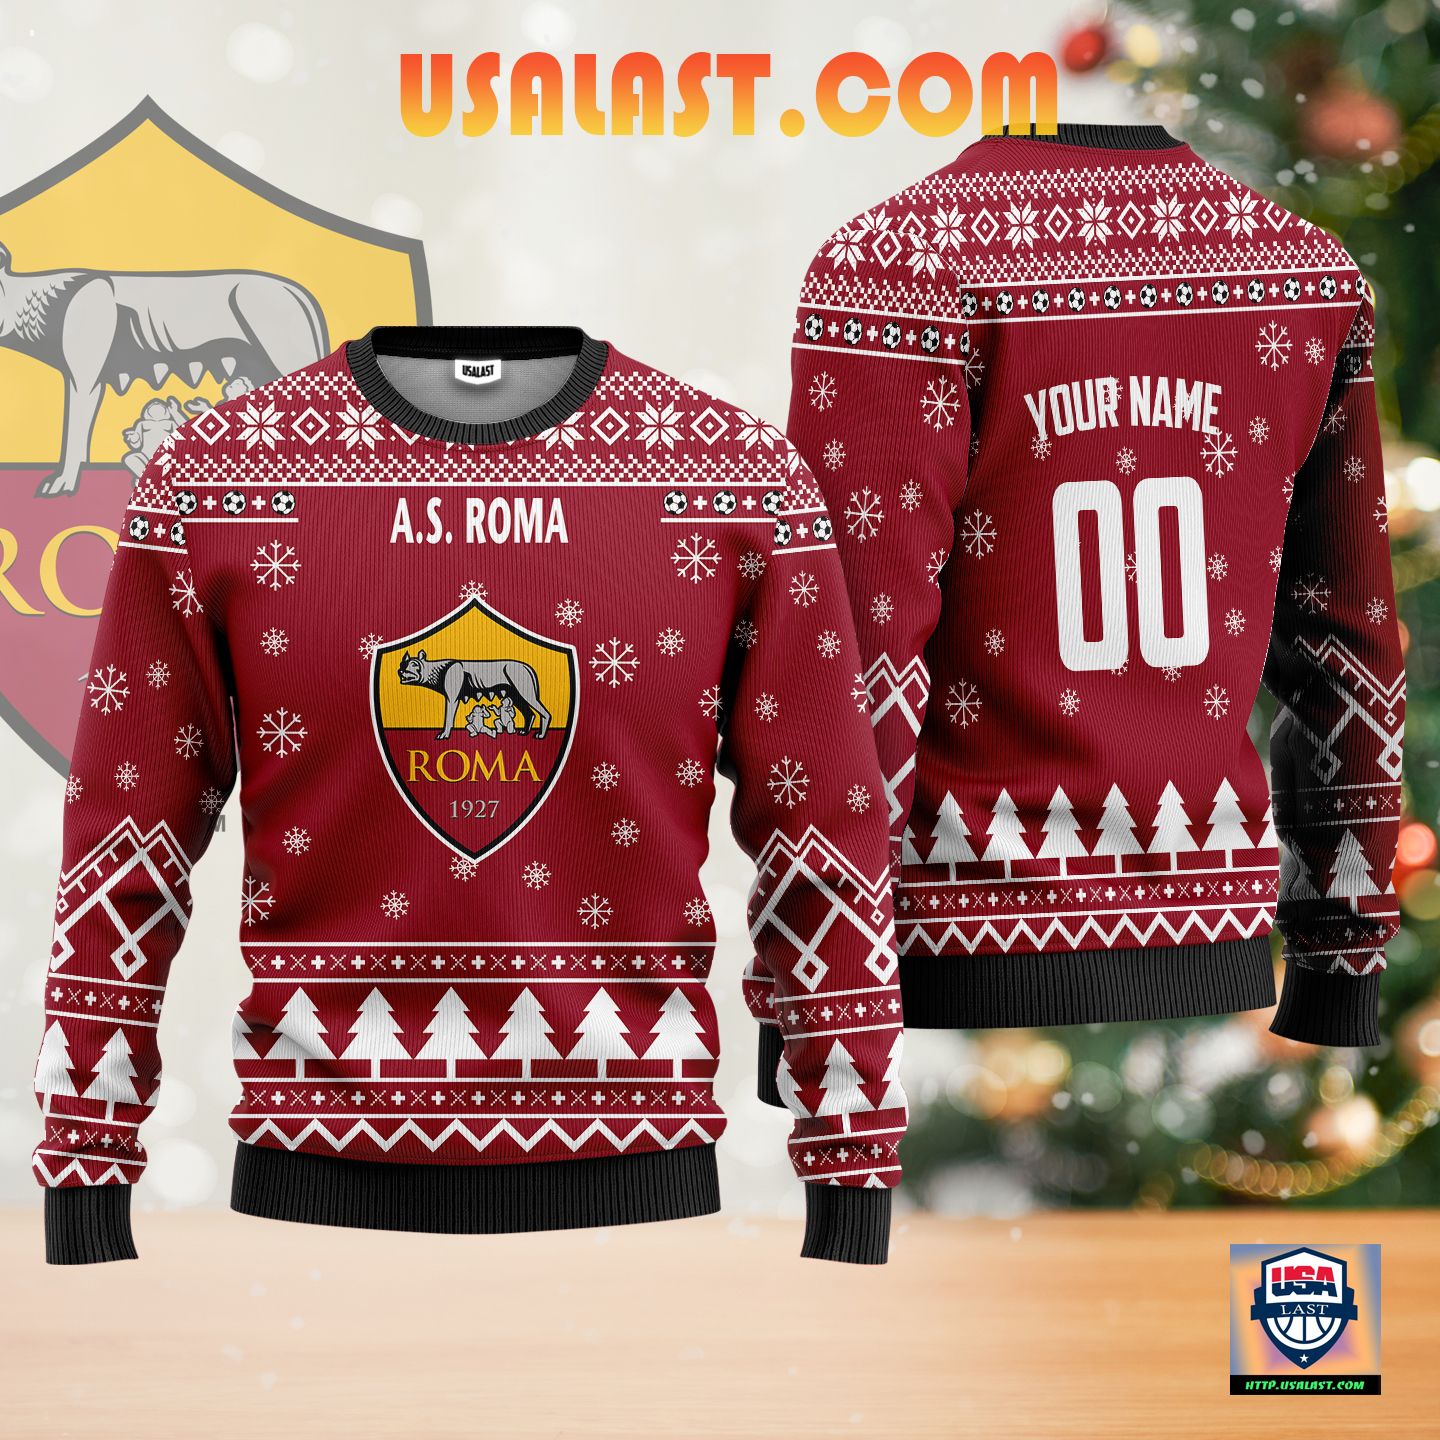 Amazing A.S Roma Personalized Ugly Christmas Sweater Red Version